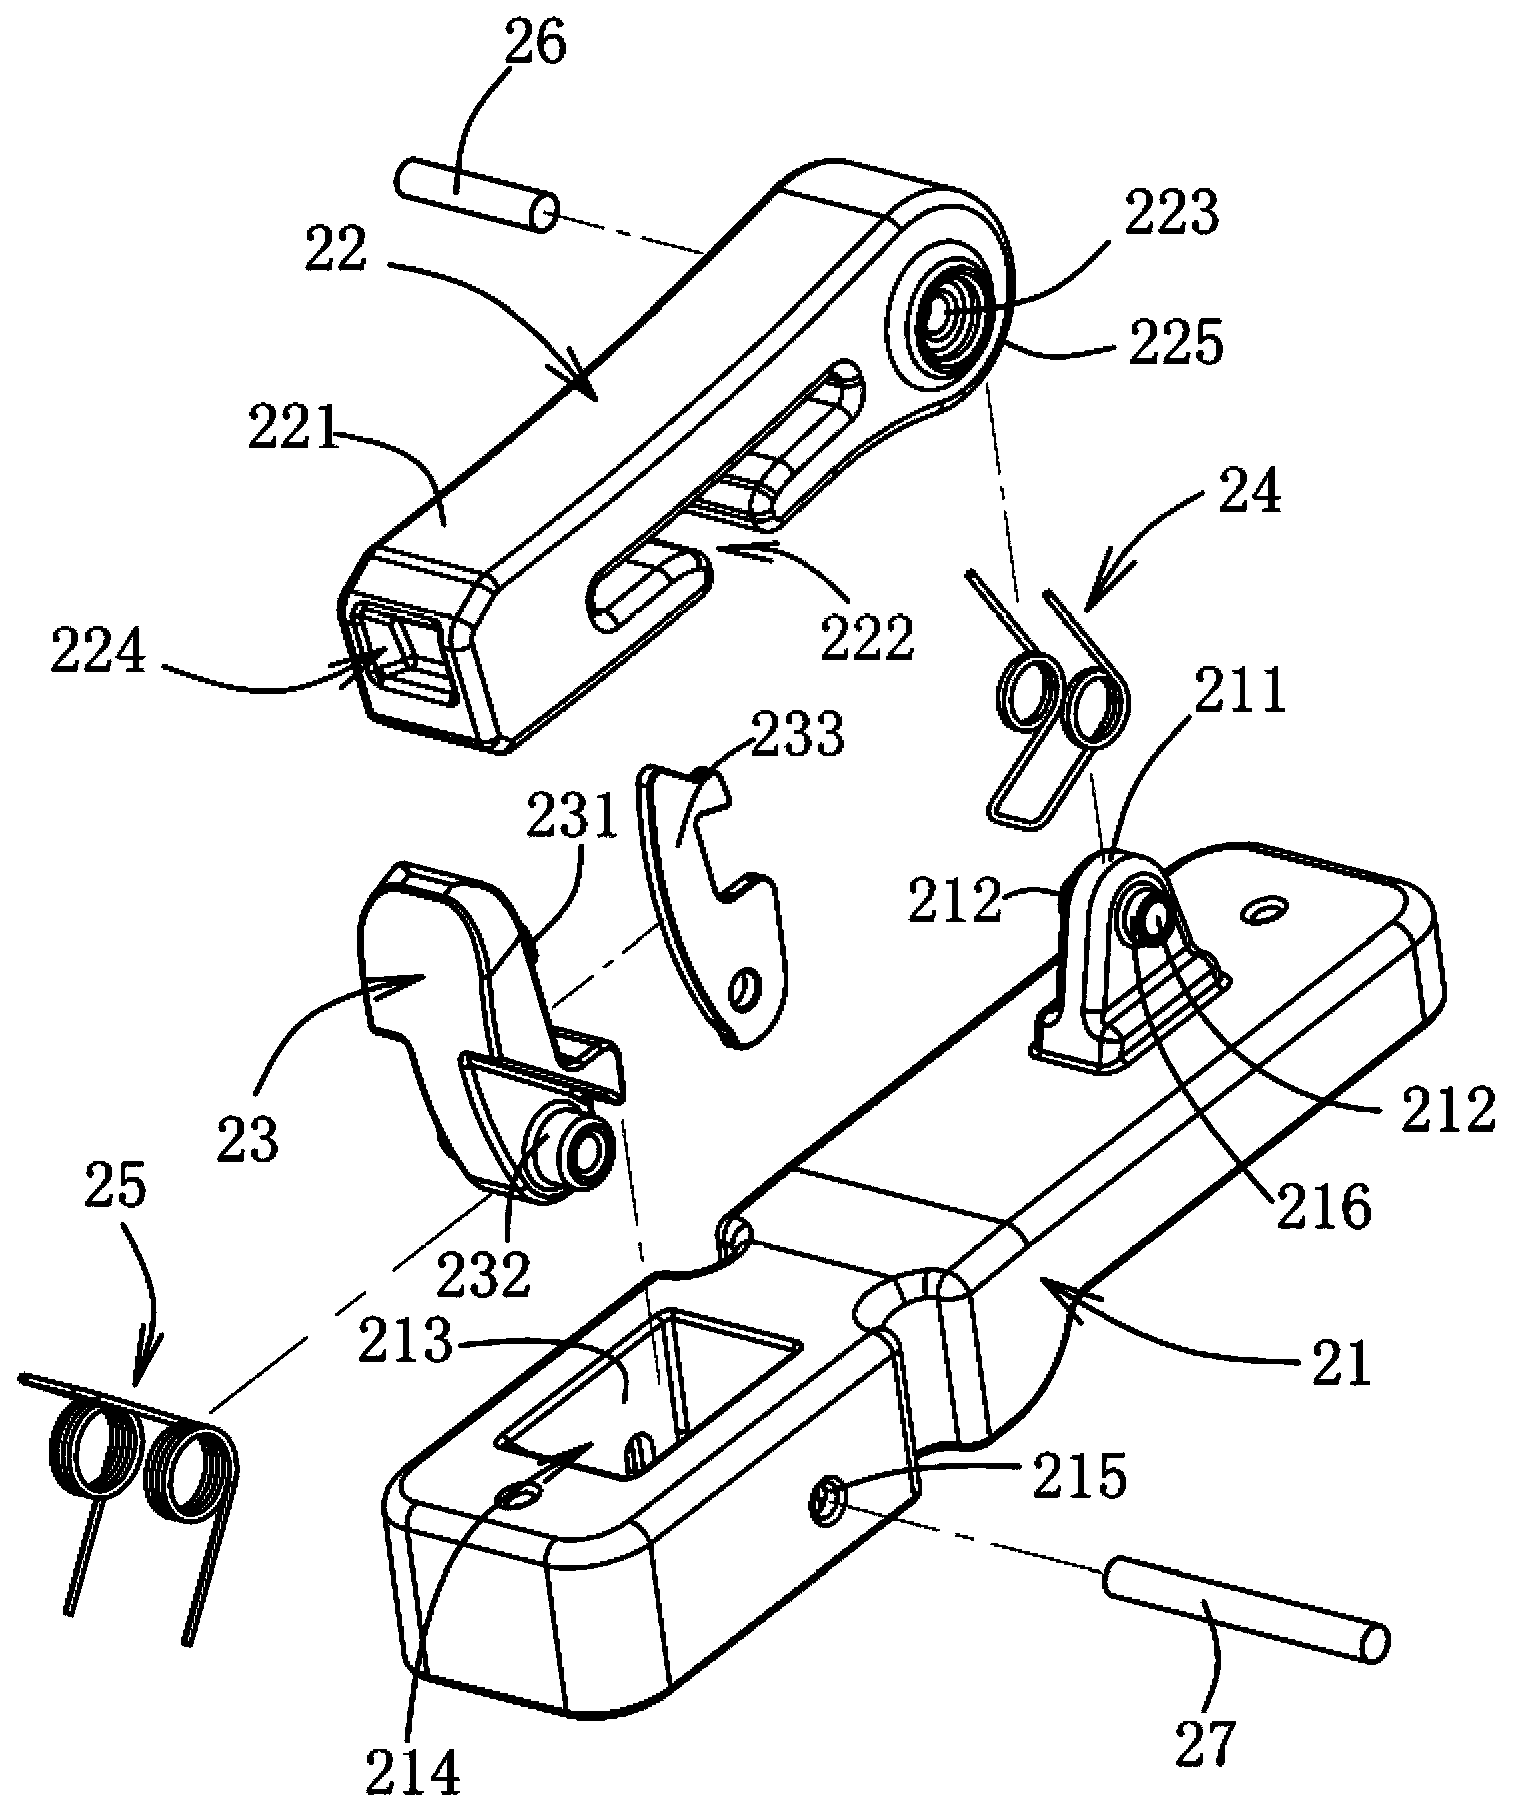 Automobile safety seat